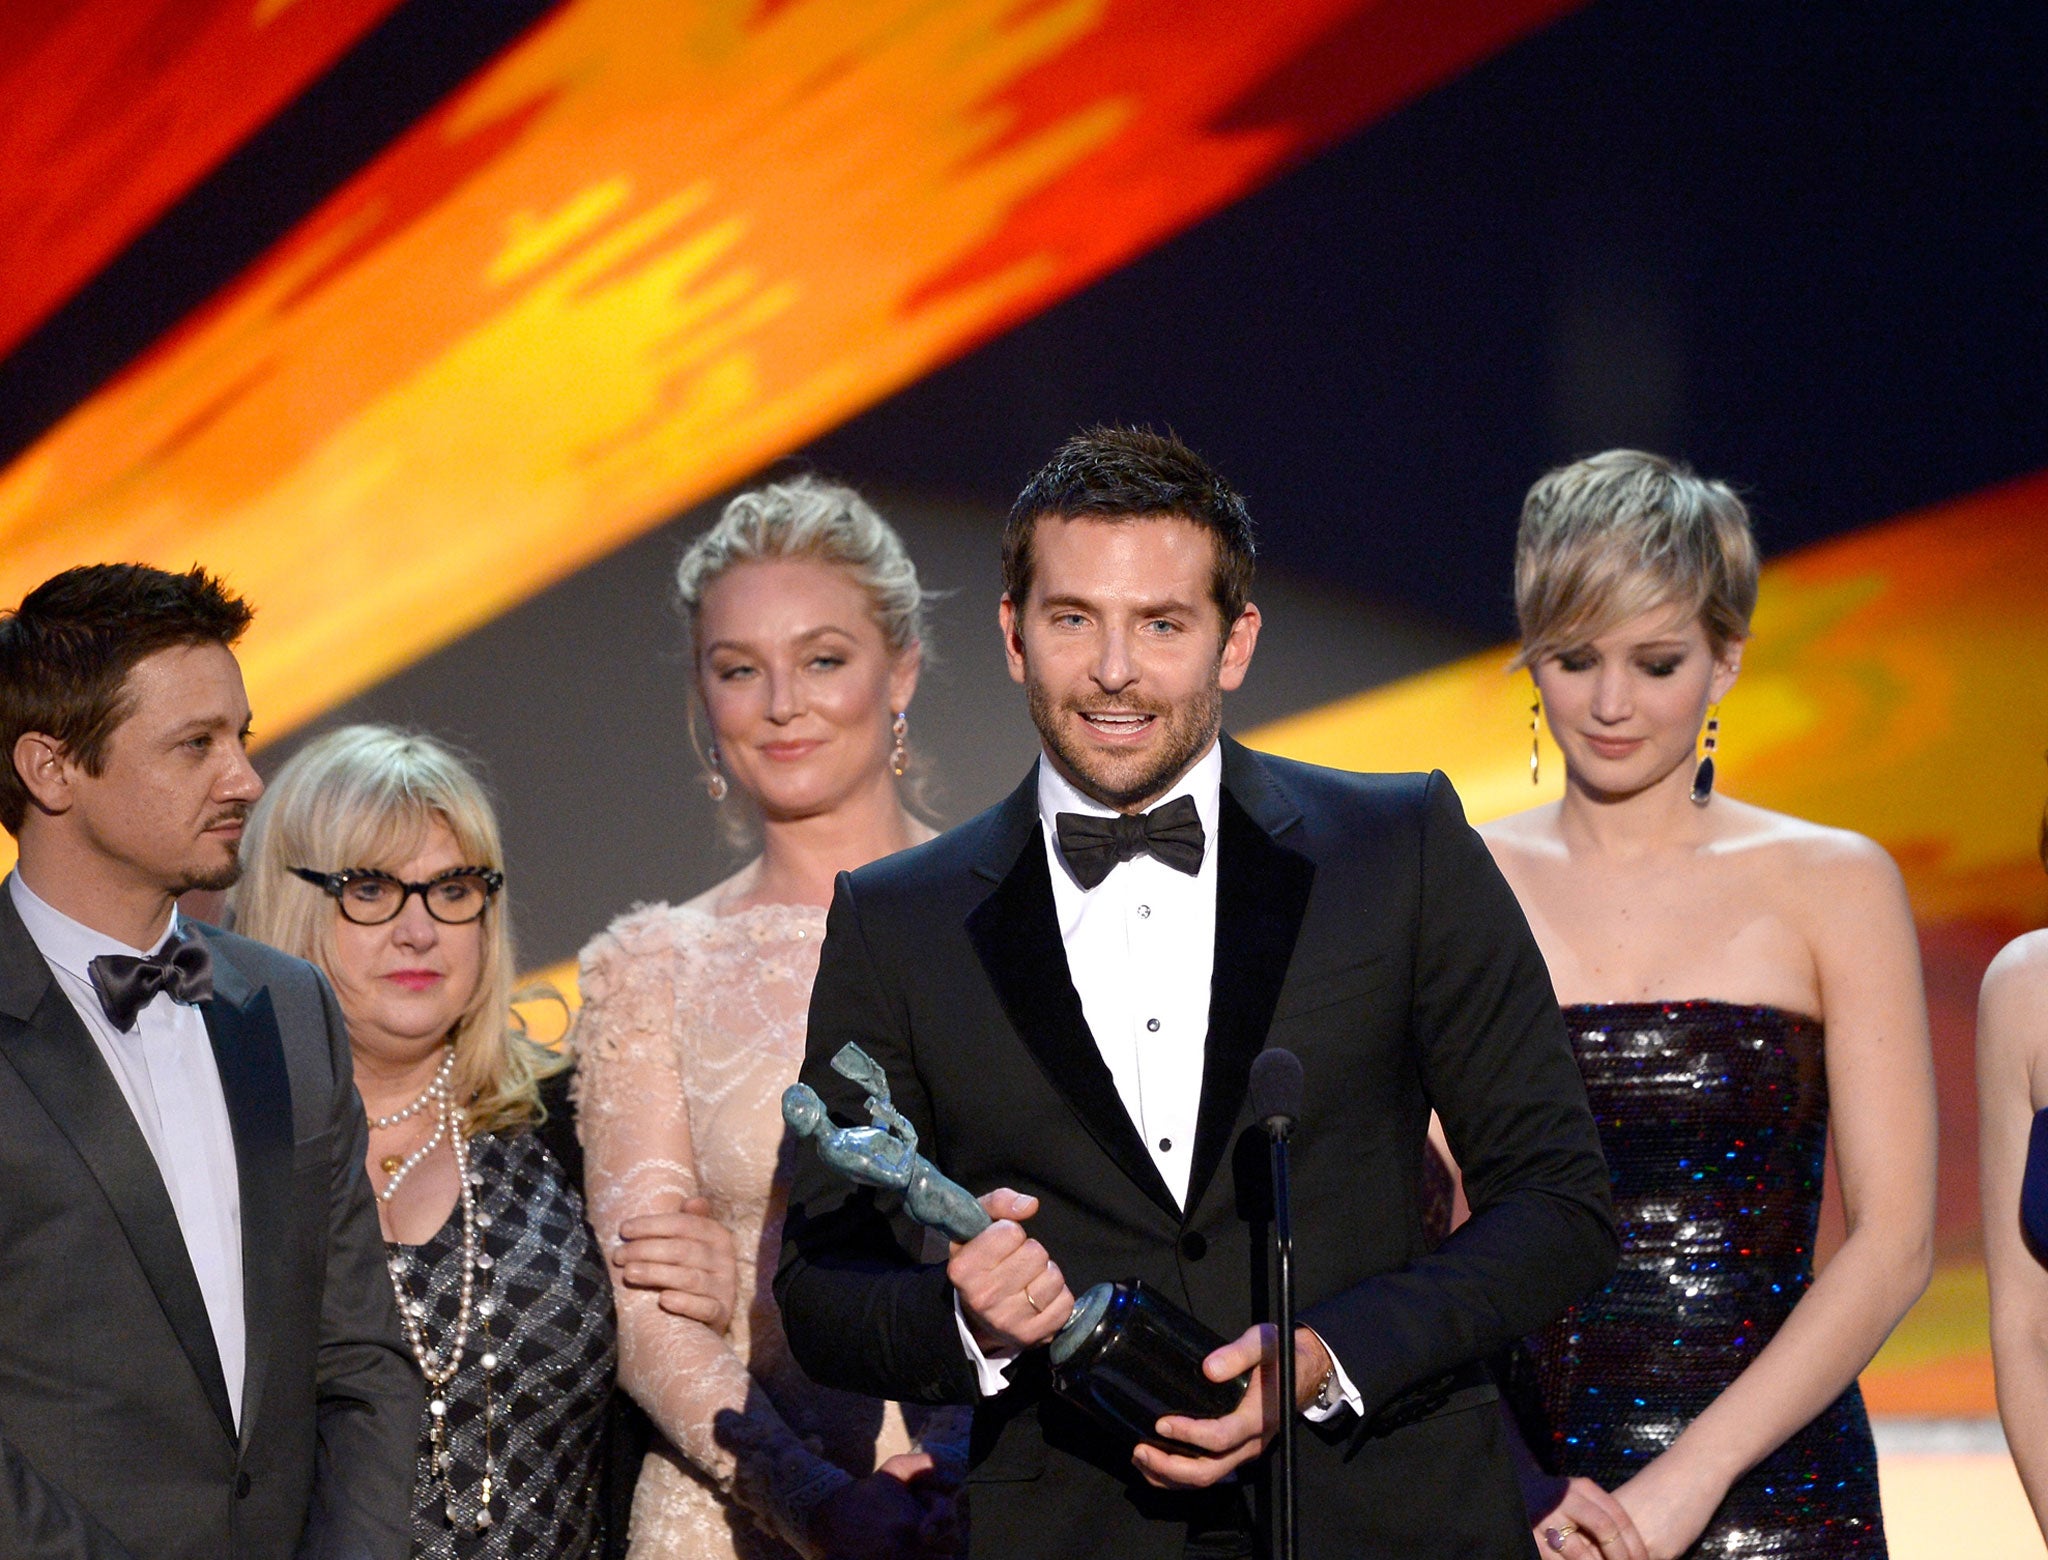 Jeremy Renner, Elisabeth Rohm, Bradley Cooper, Jennifer Lawrence and Amy Adams accept the Outstanding Performance by a Cast in a Motion Picture award for 'American Hustle' onstage during the 20th Annual Screen Actors Guild Awards